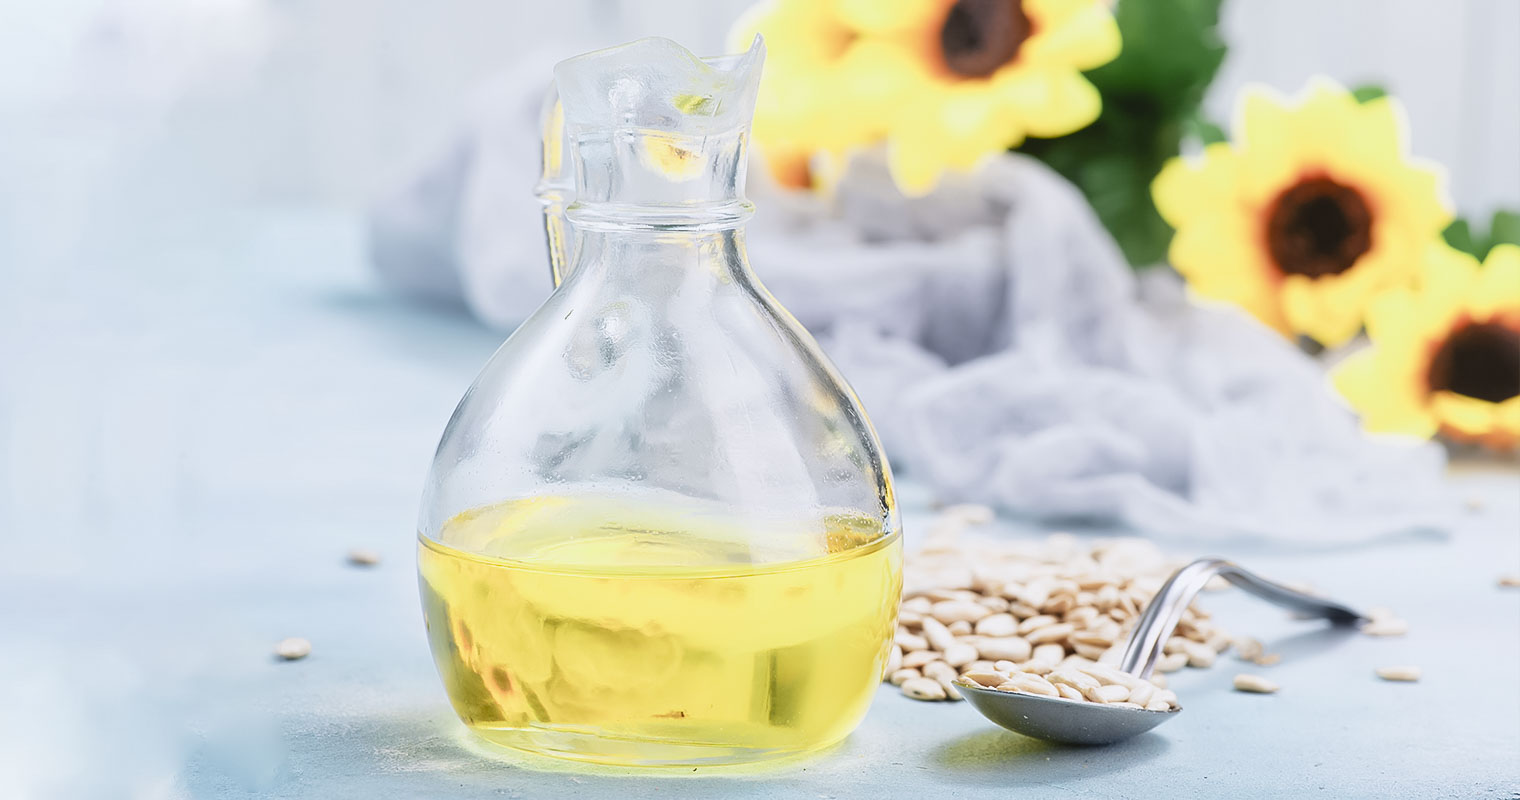 A jar of sunflower oil with sunflower and seeds in the background